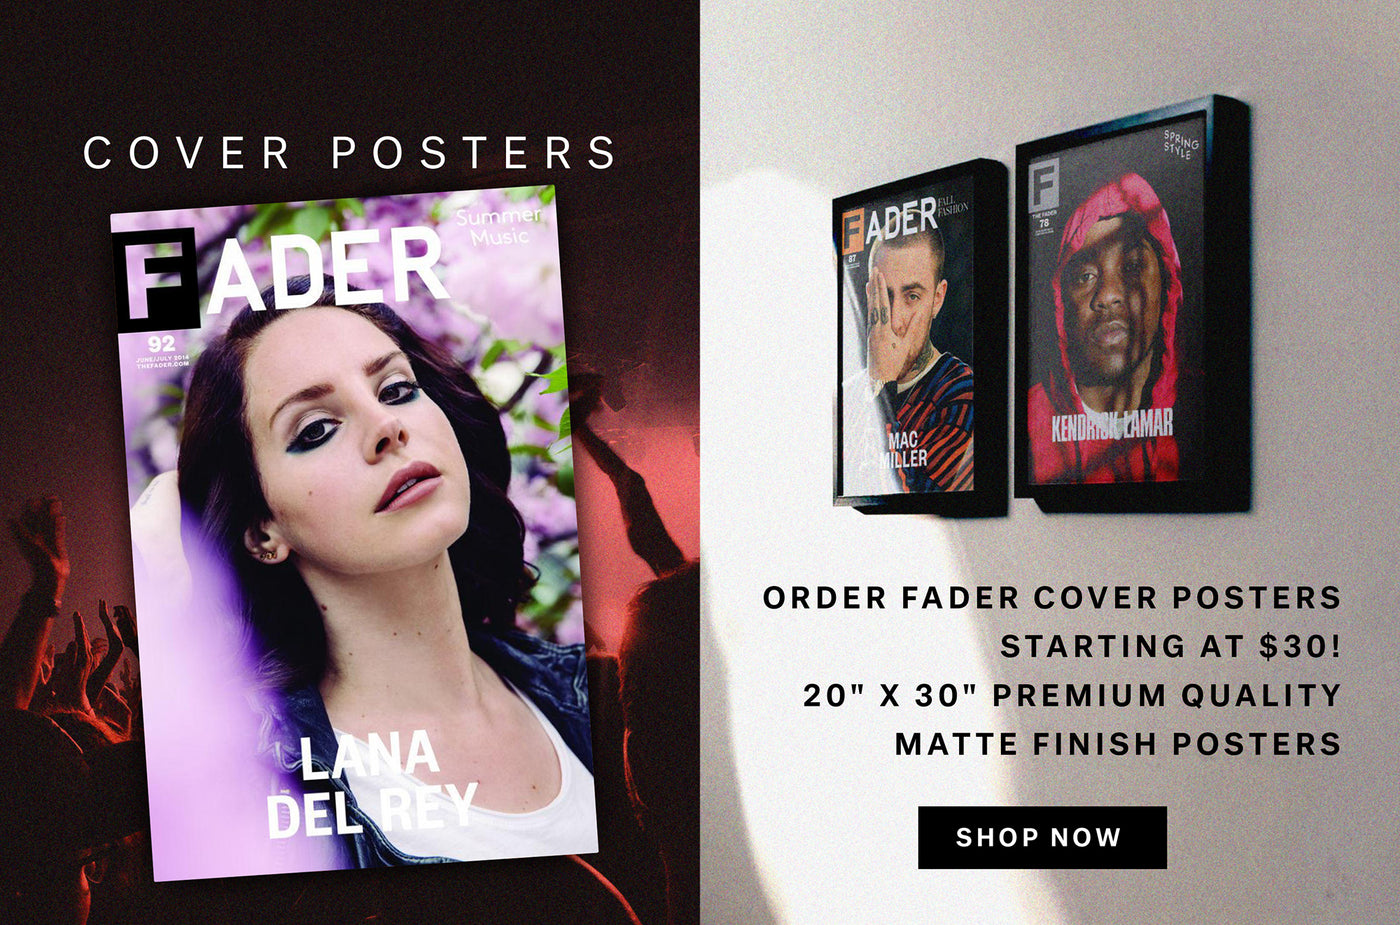 Lana Del Rey poster- The FADER issue 92. Mac Miller poster-The FADER issue 87 cover. Kendrick Lamar poster- the FADER issue 78 cover.